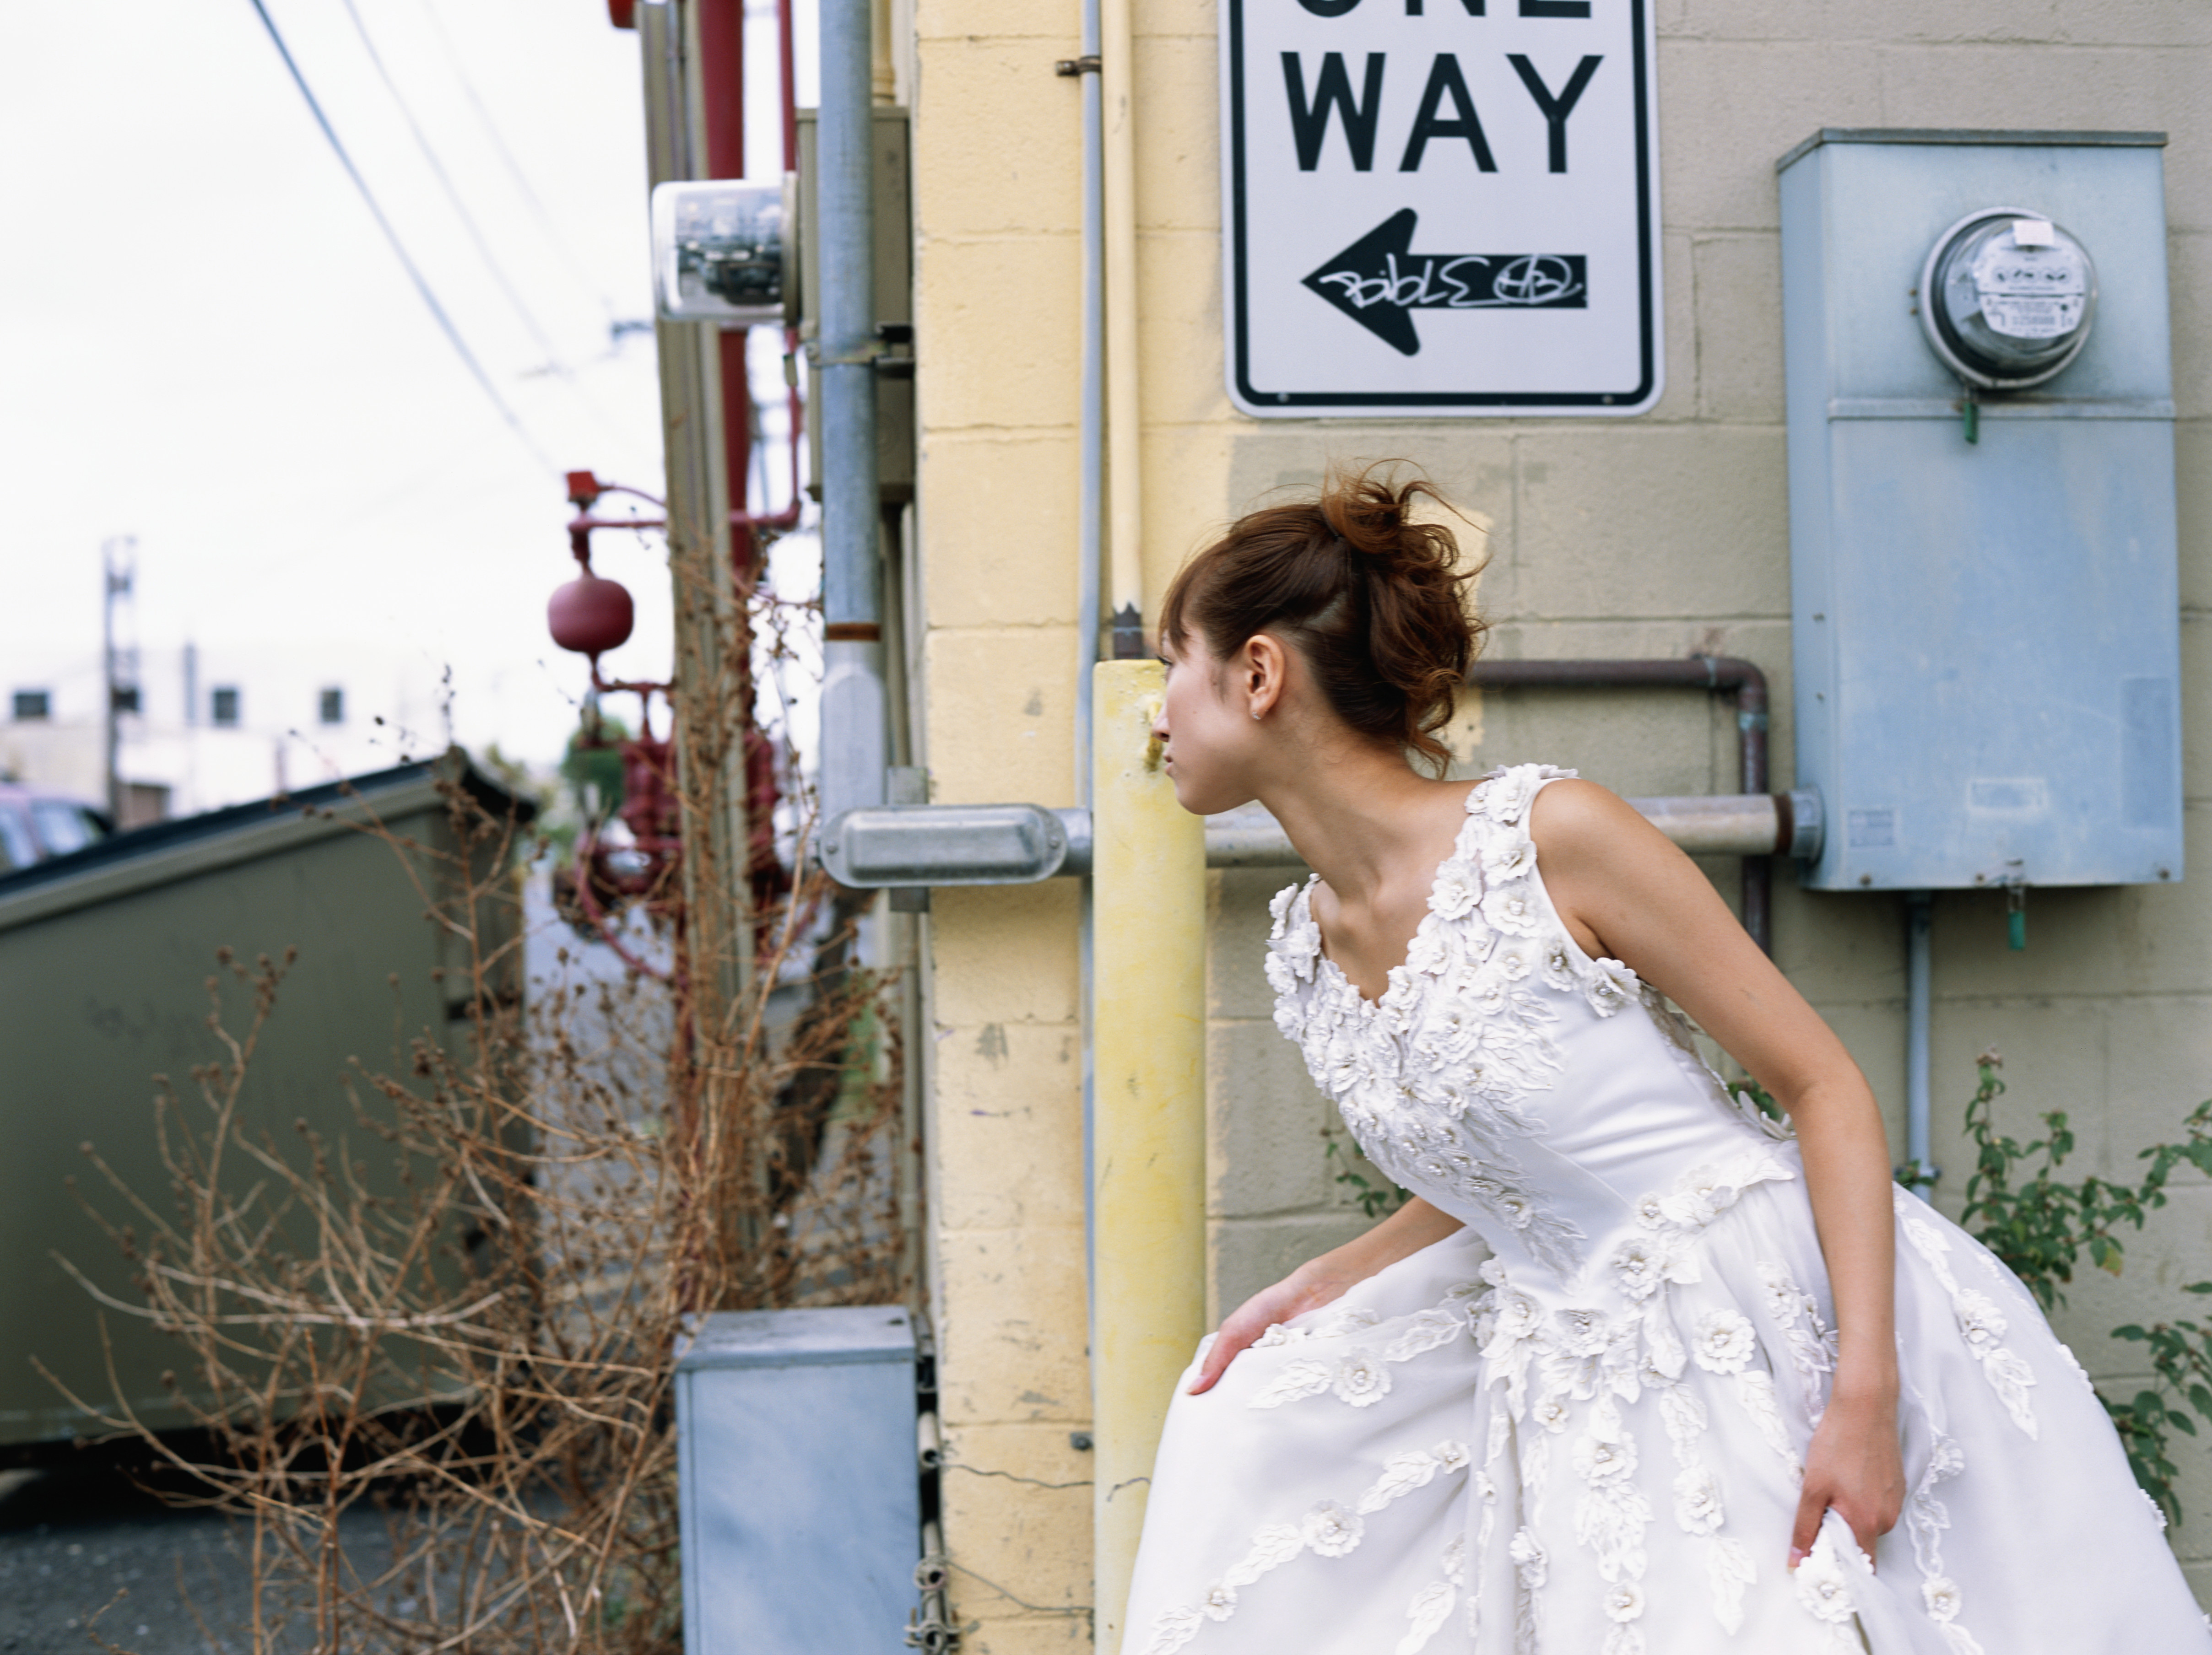 Bride running away | Source: Getty Images